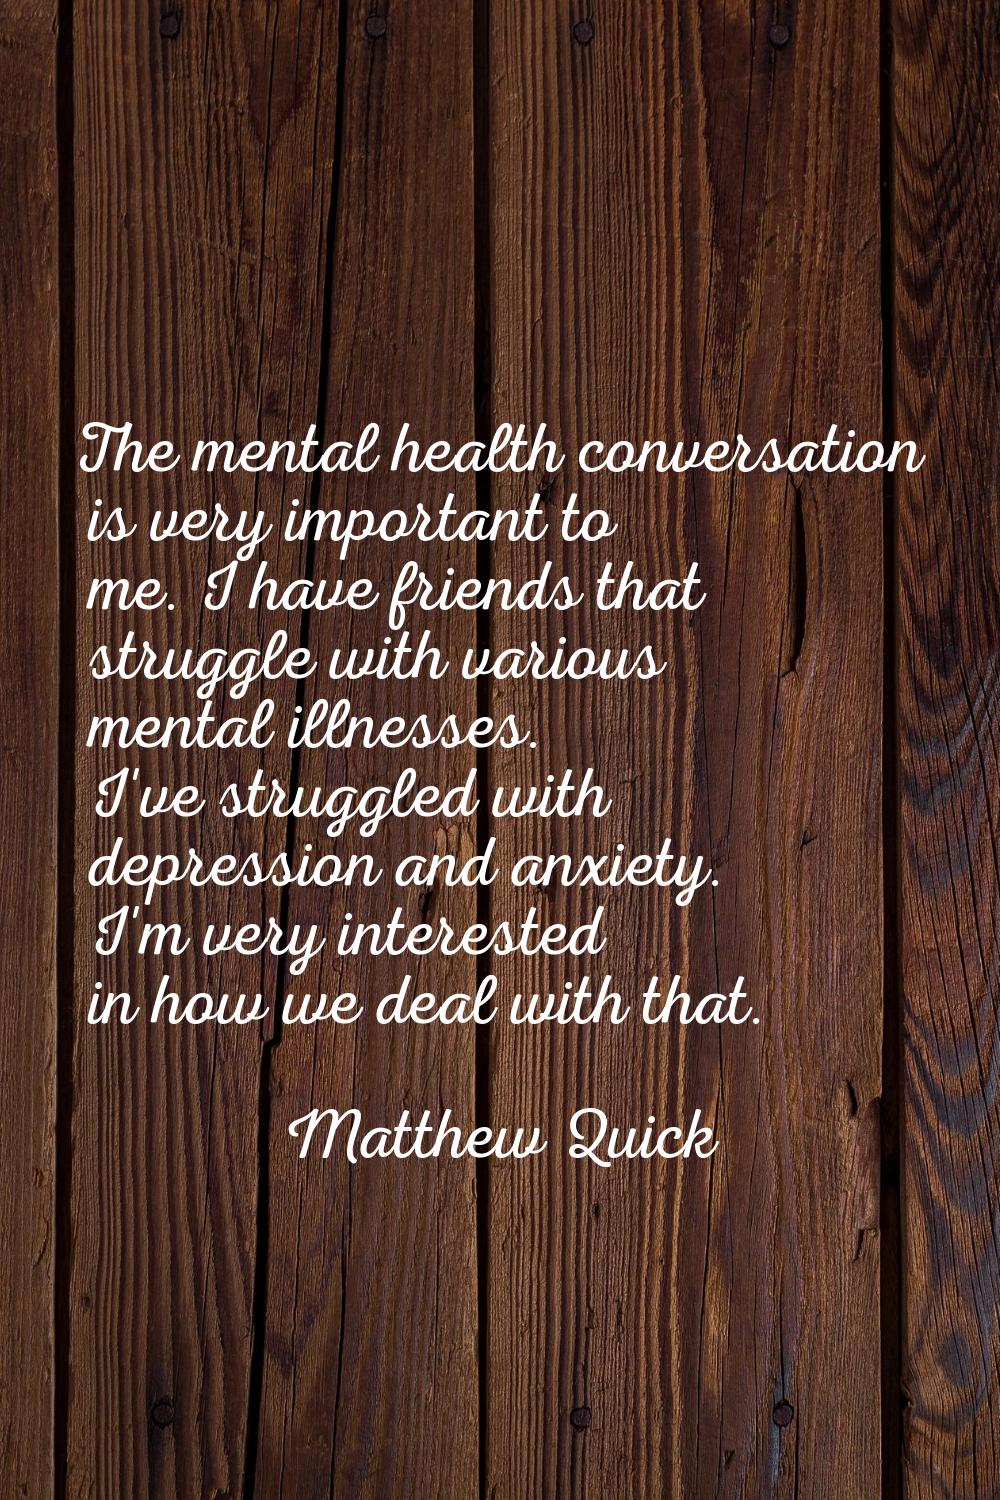 The mental health conversation is very important to me. I have friends that struggle with various m